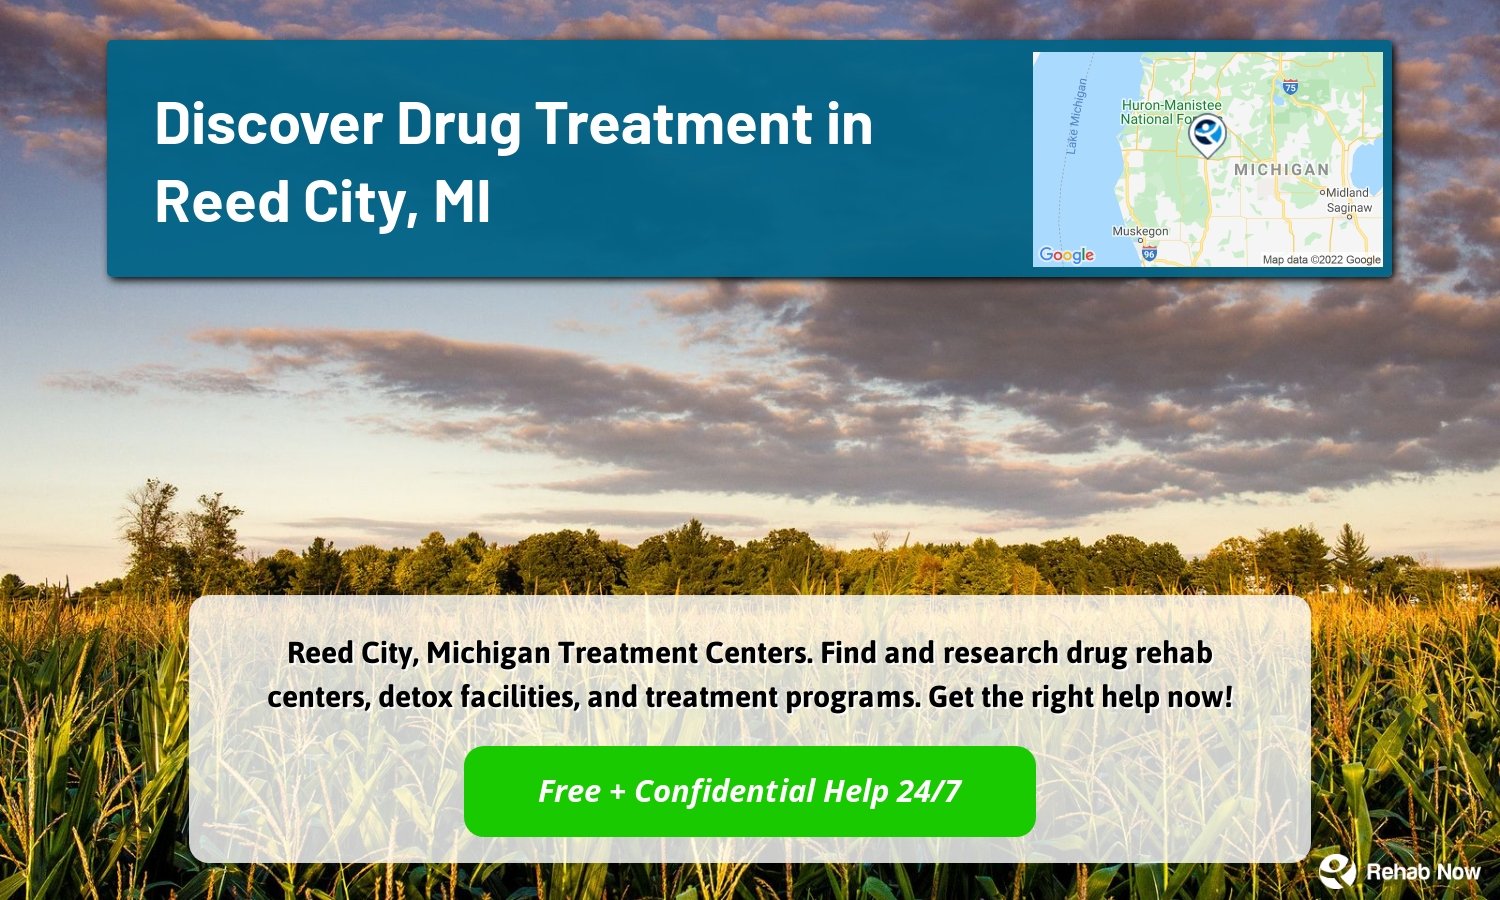 Reed City, Michigan Treatment Centers. Find and research drug rehab centers, detox facilities, and treatment programs. Get the right help now!